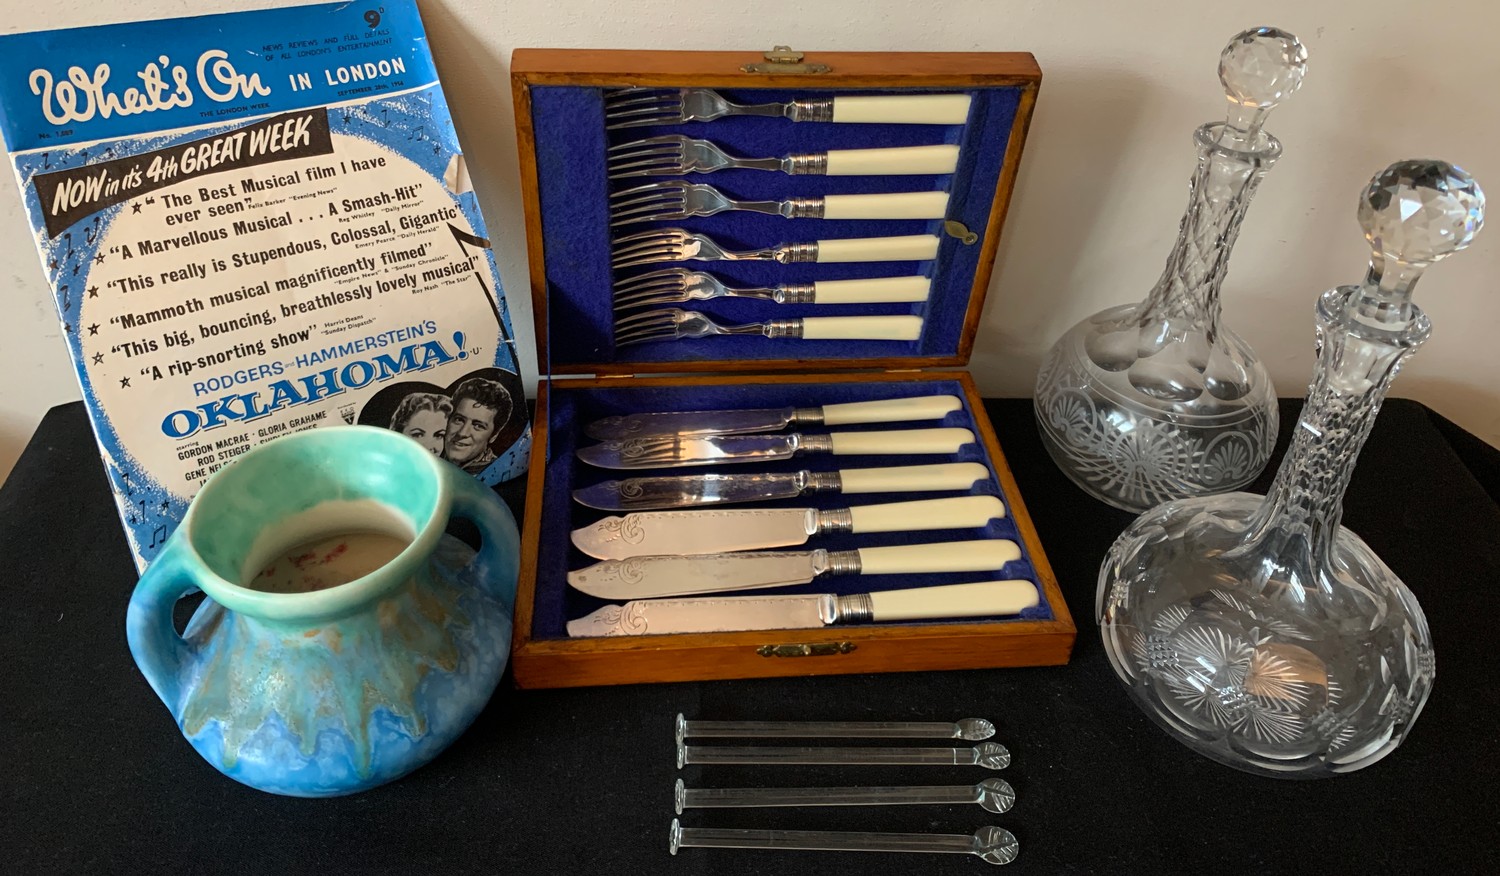 Miscellany including 2 glass decanters, boxed fish knives & forks, glass sugar crushers, 'Whats on